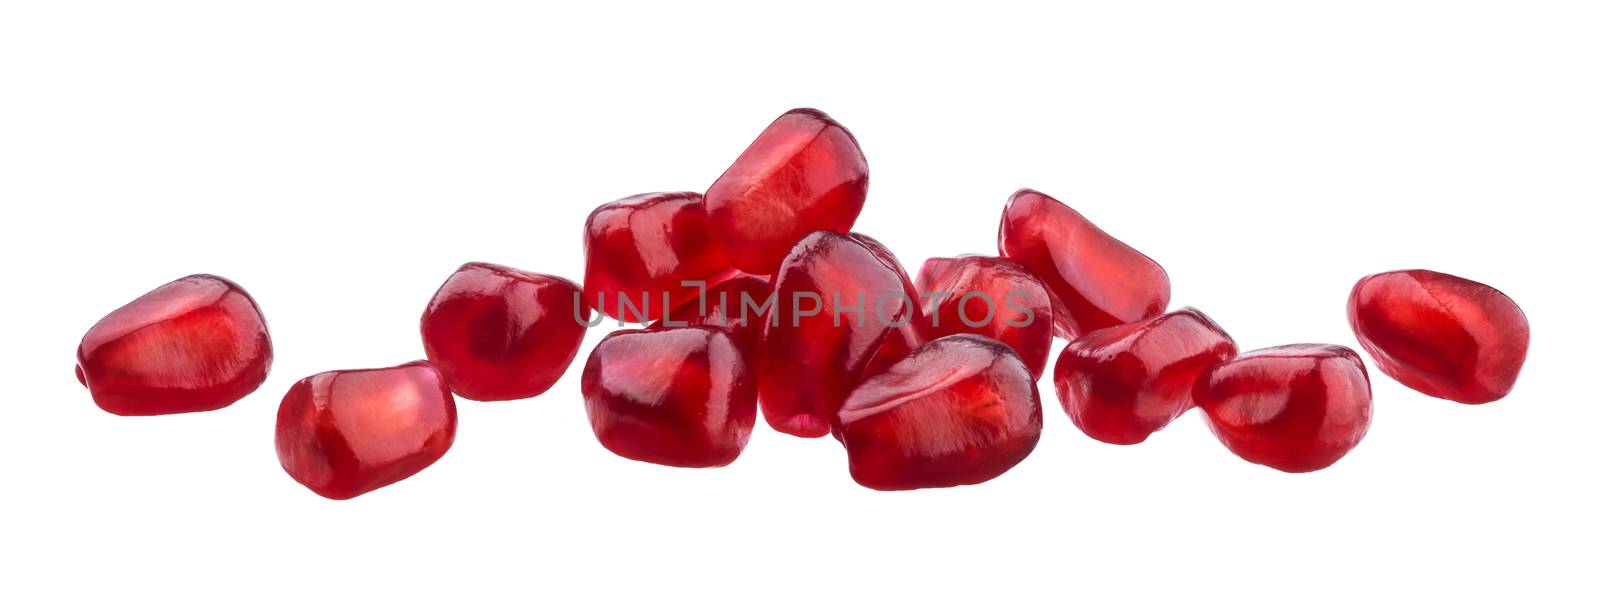 Pomegranate seeds isolated on white background with clipping path